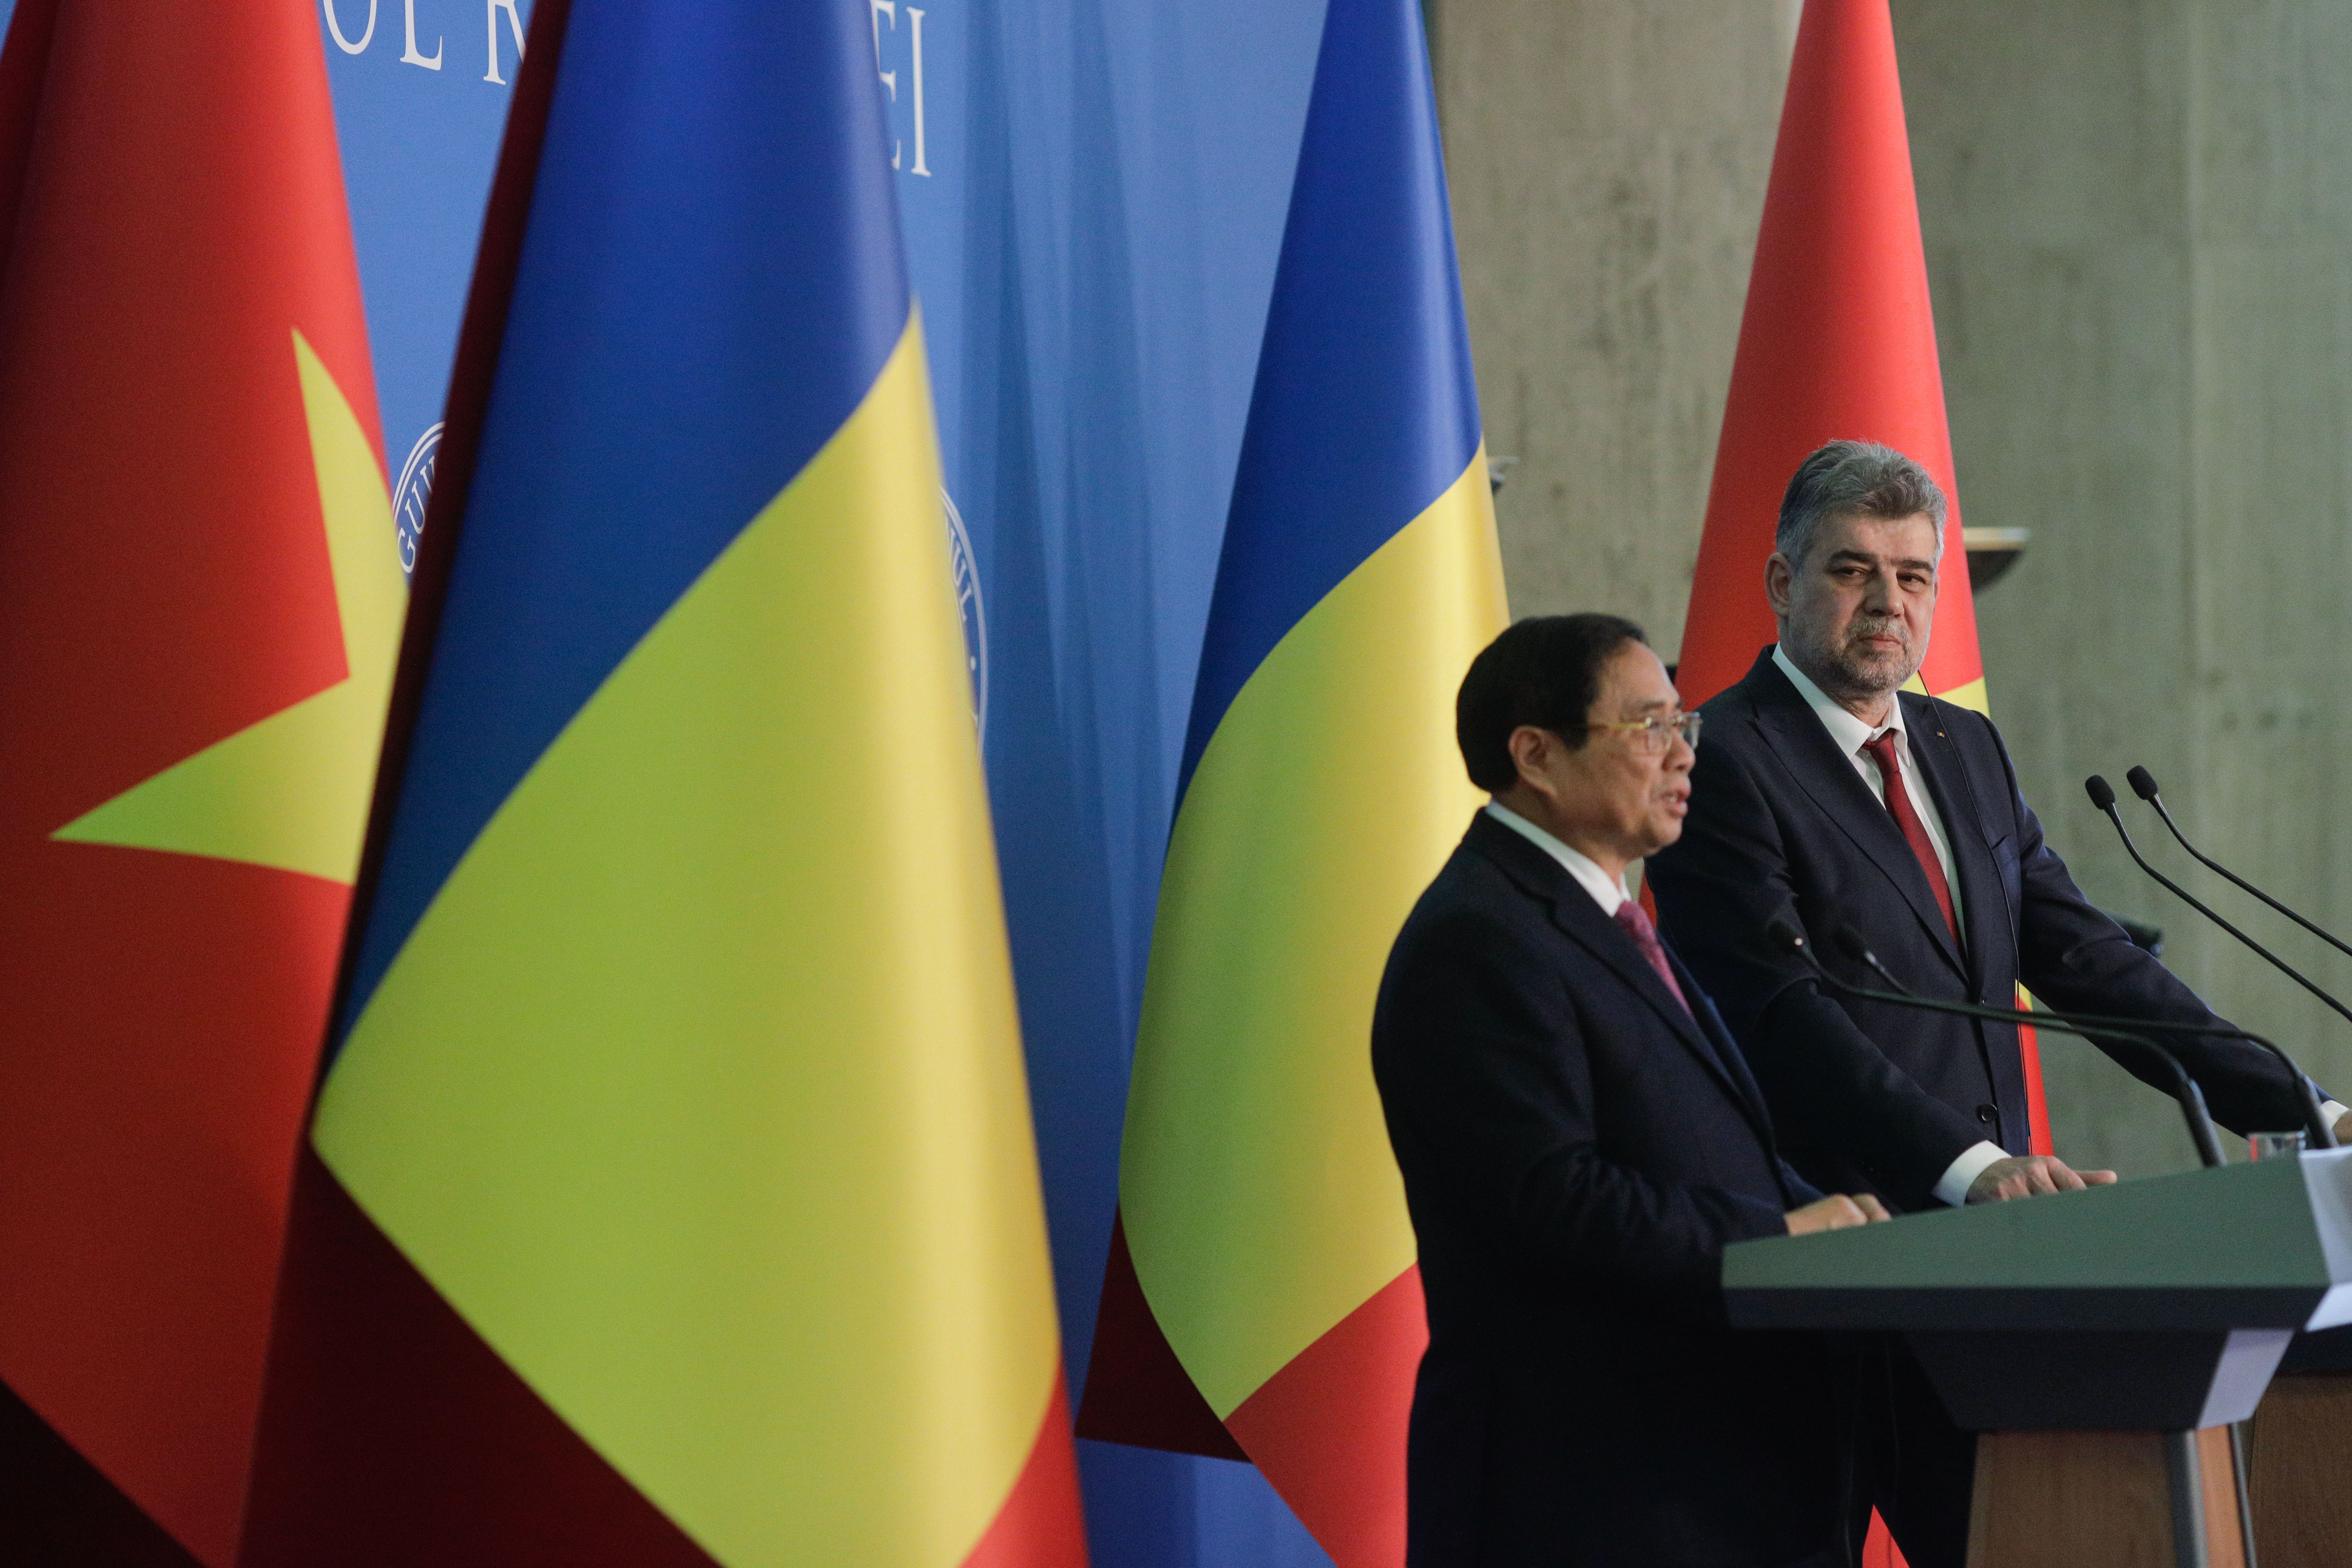 Romania aims to double trade exchanges to EUR 1 billion with Vietnam, PM says